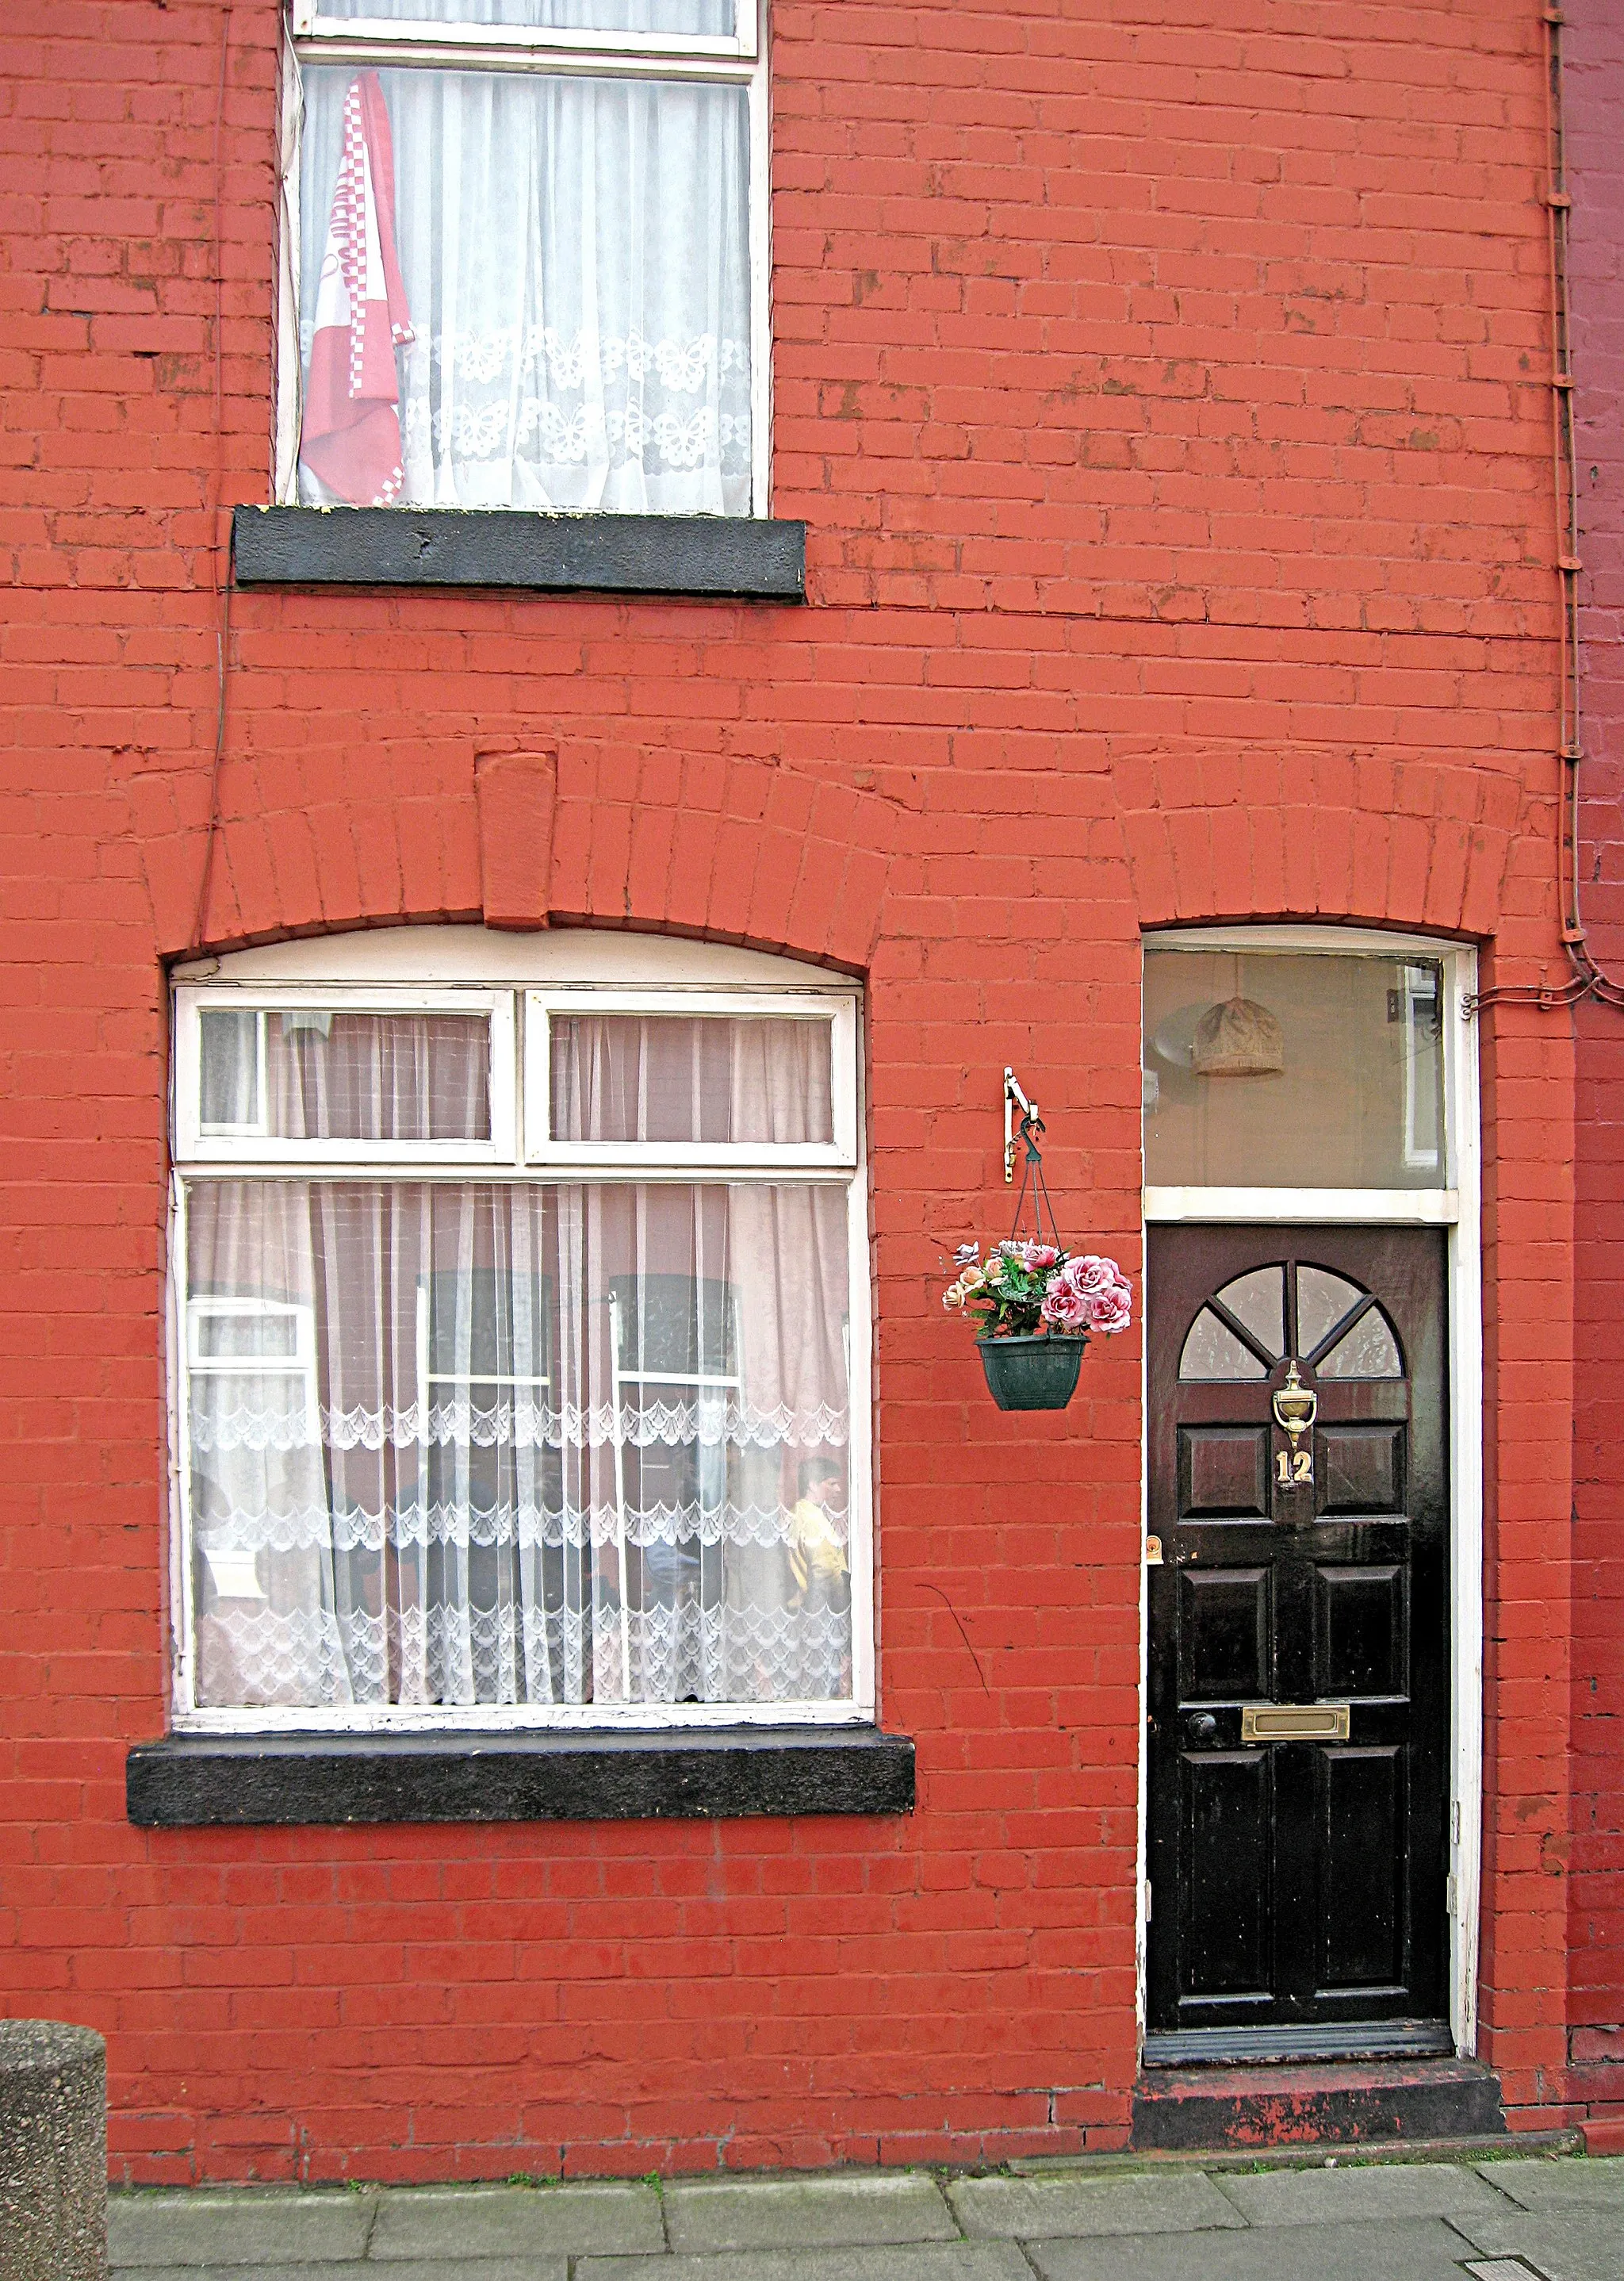 Photo showing: 12 Arnold Grove, Liverpool. The house where George Harrison was born and lived until he was 7.